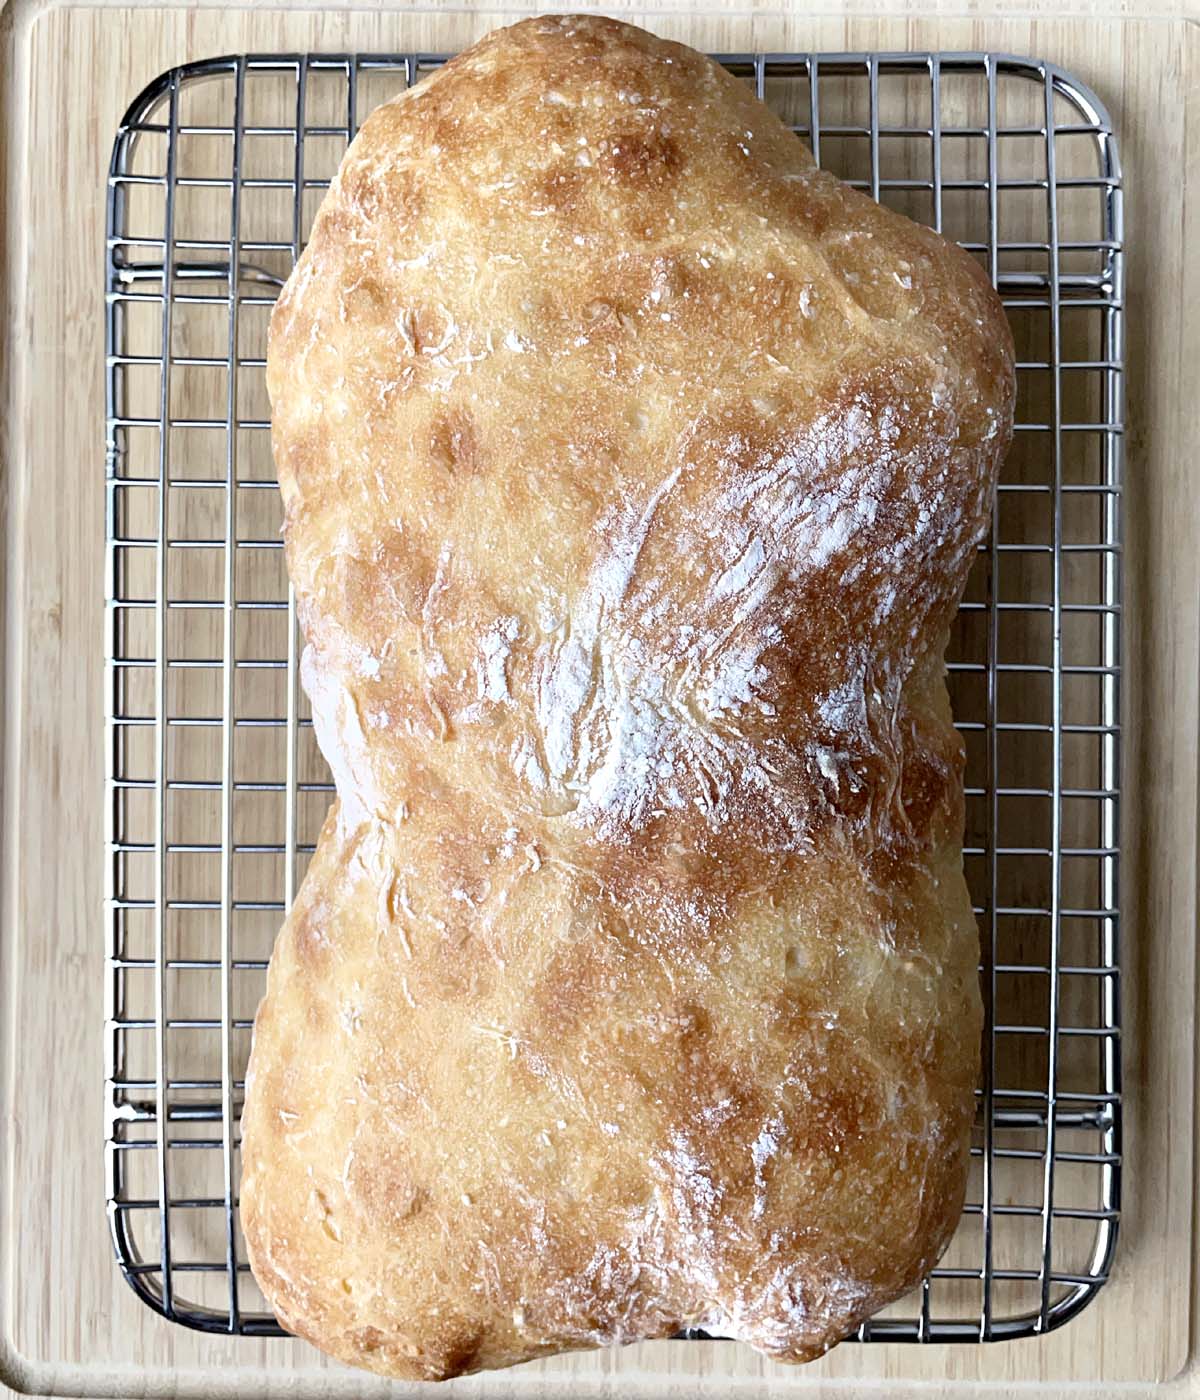 A brown baked loaf of bread on a metal rack on a wooden cutting board.